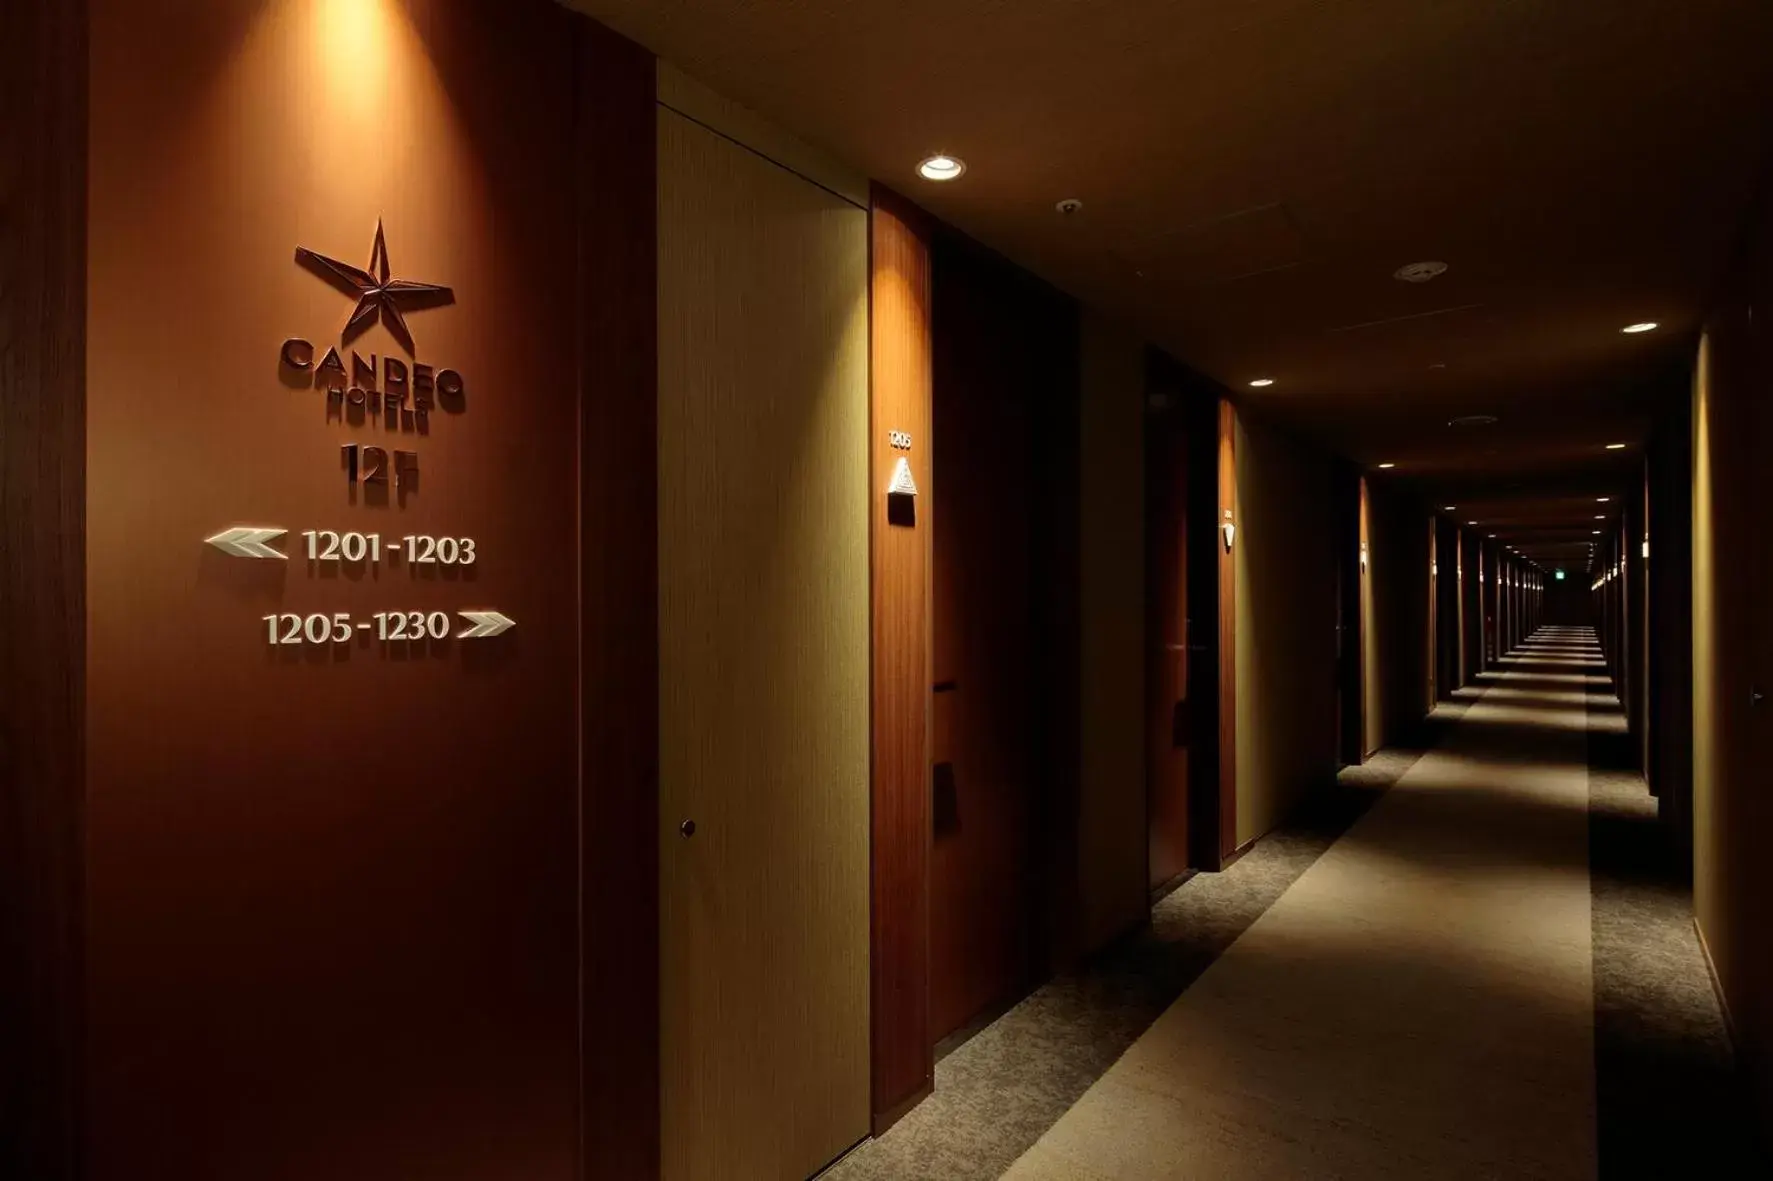 Area and facilities in Candeo Hotels Omiya